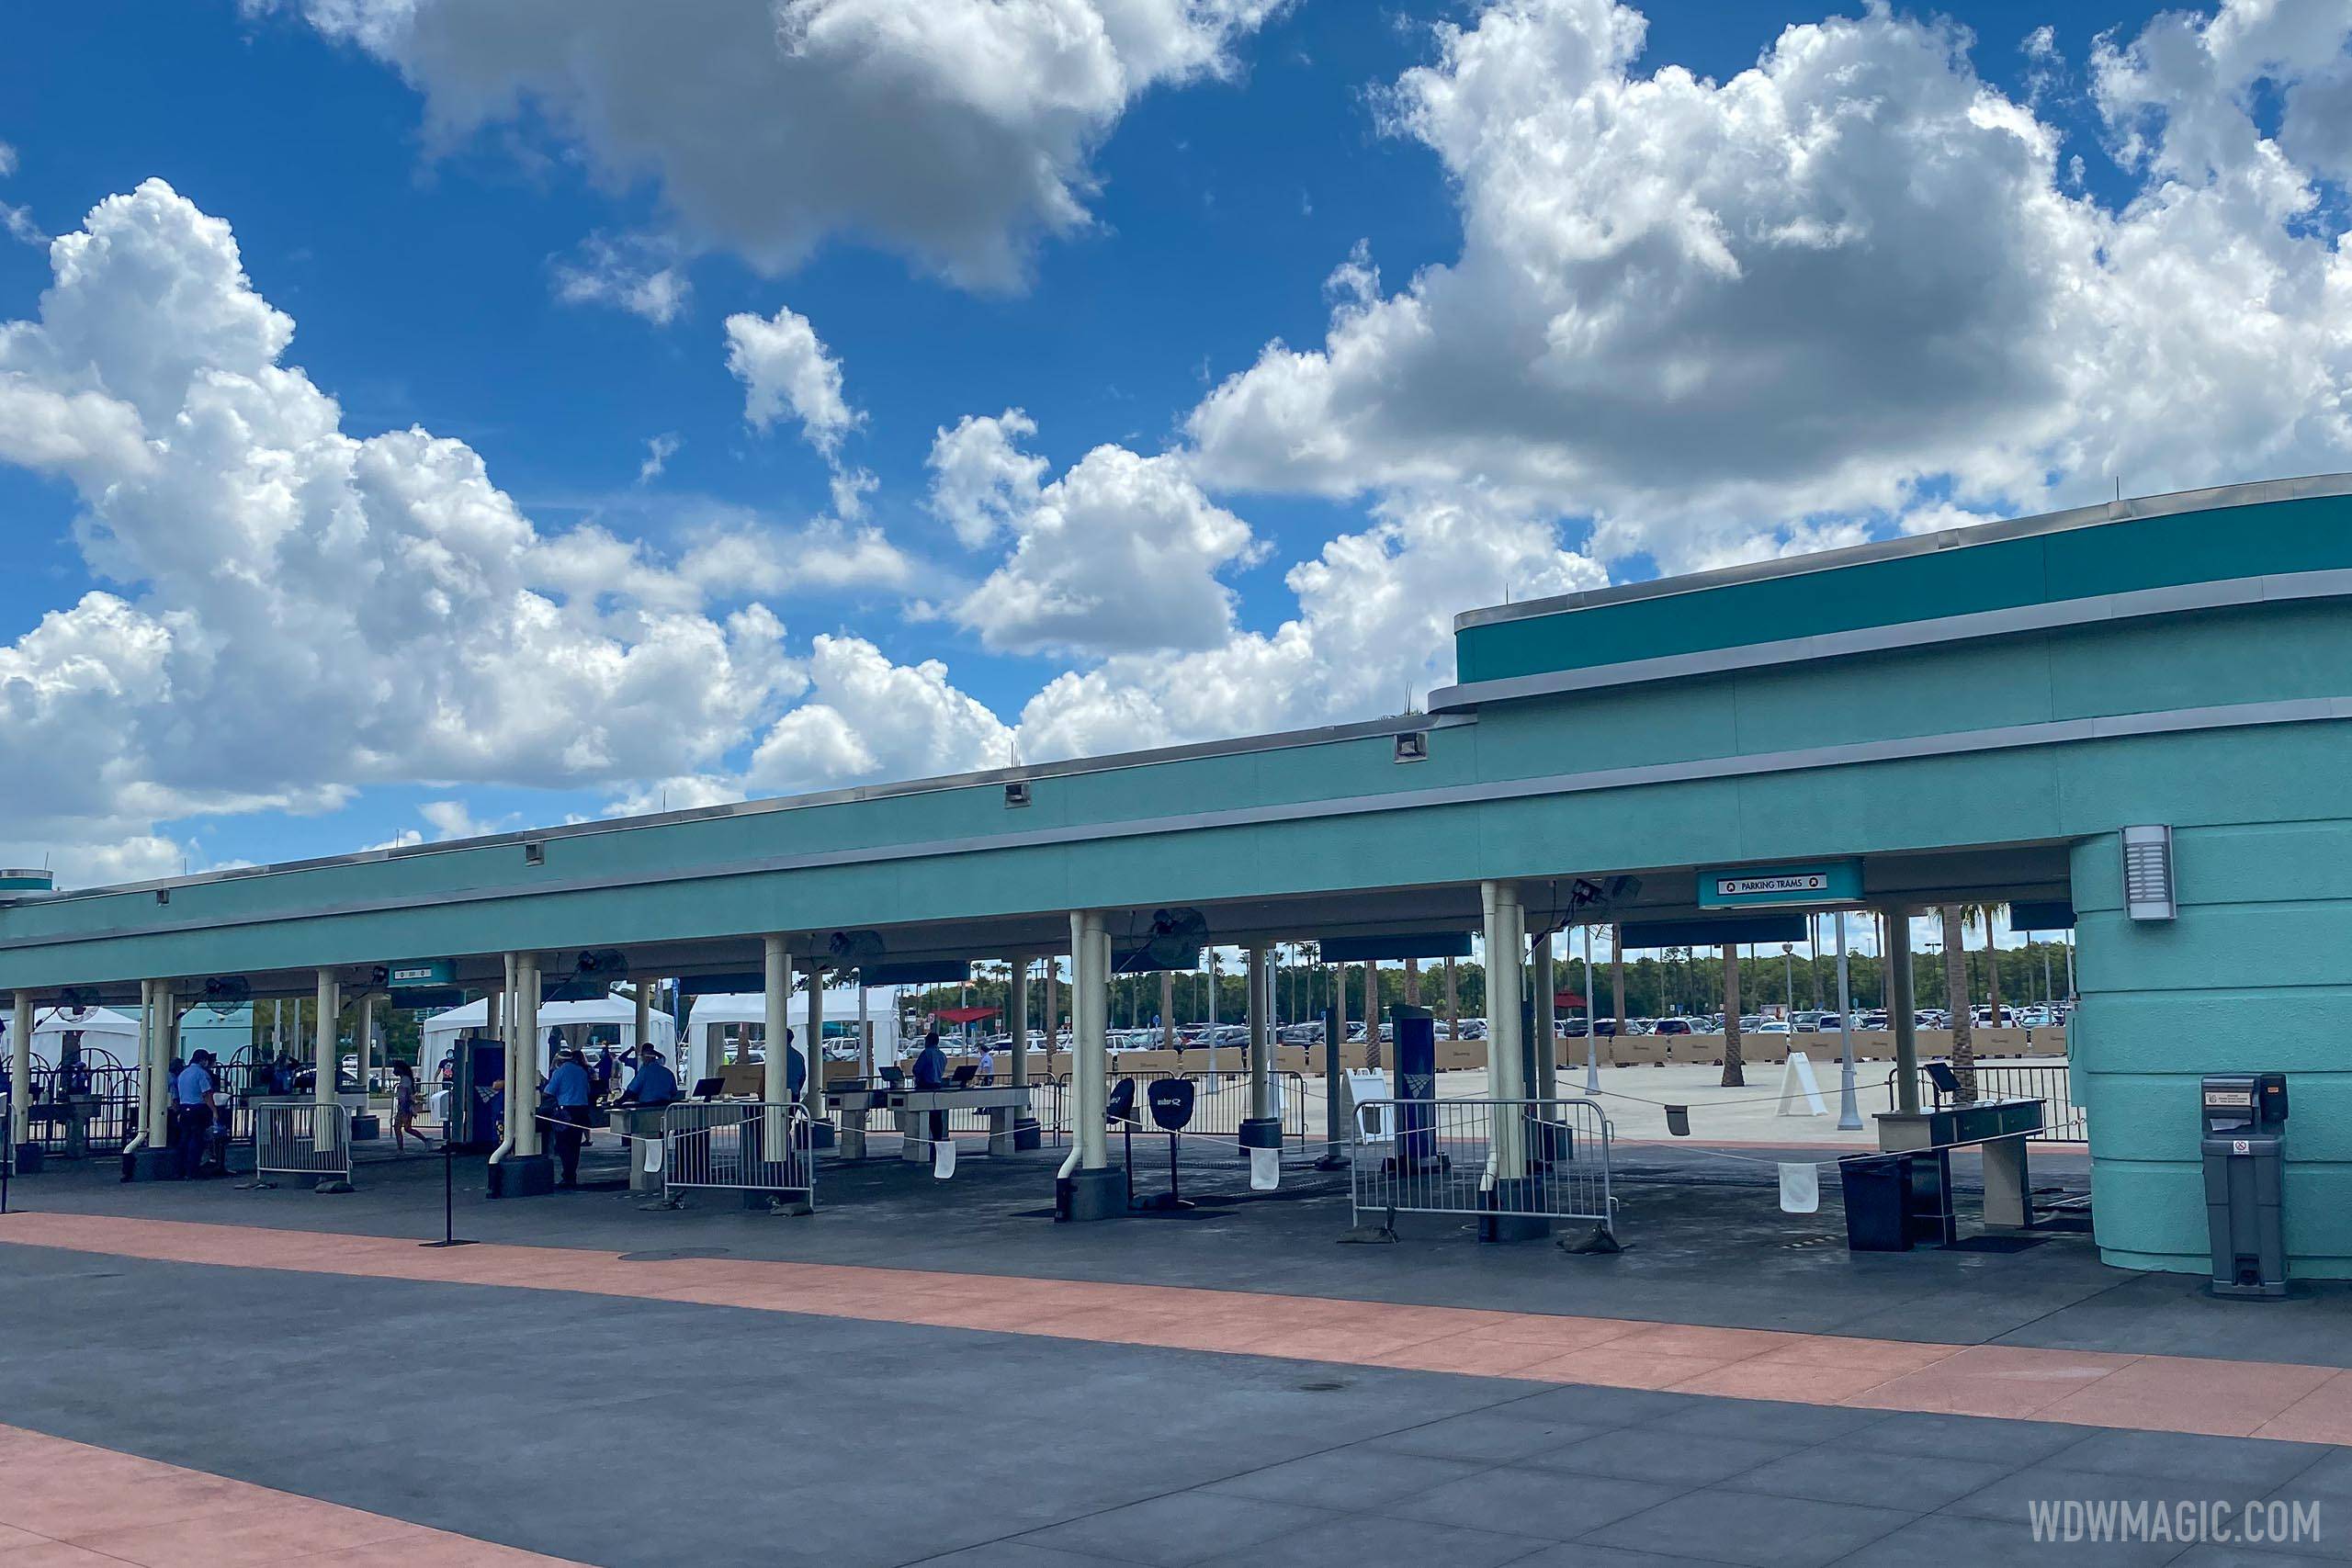 New walk-through security scanners at Disney's Hollywood Studios